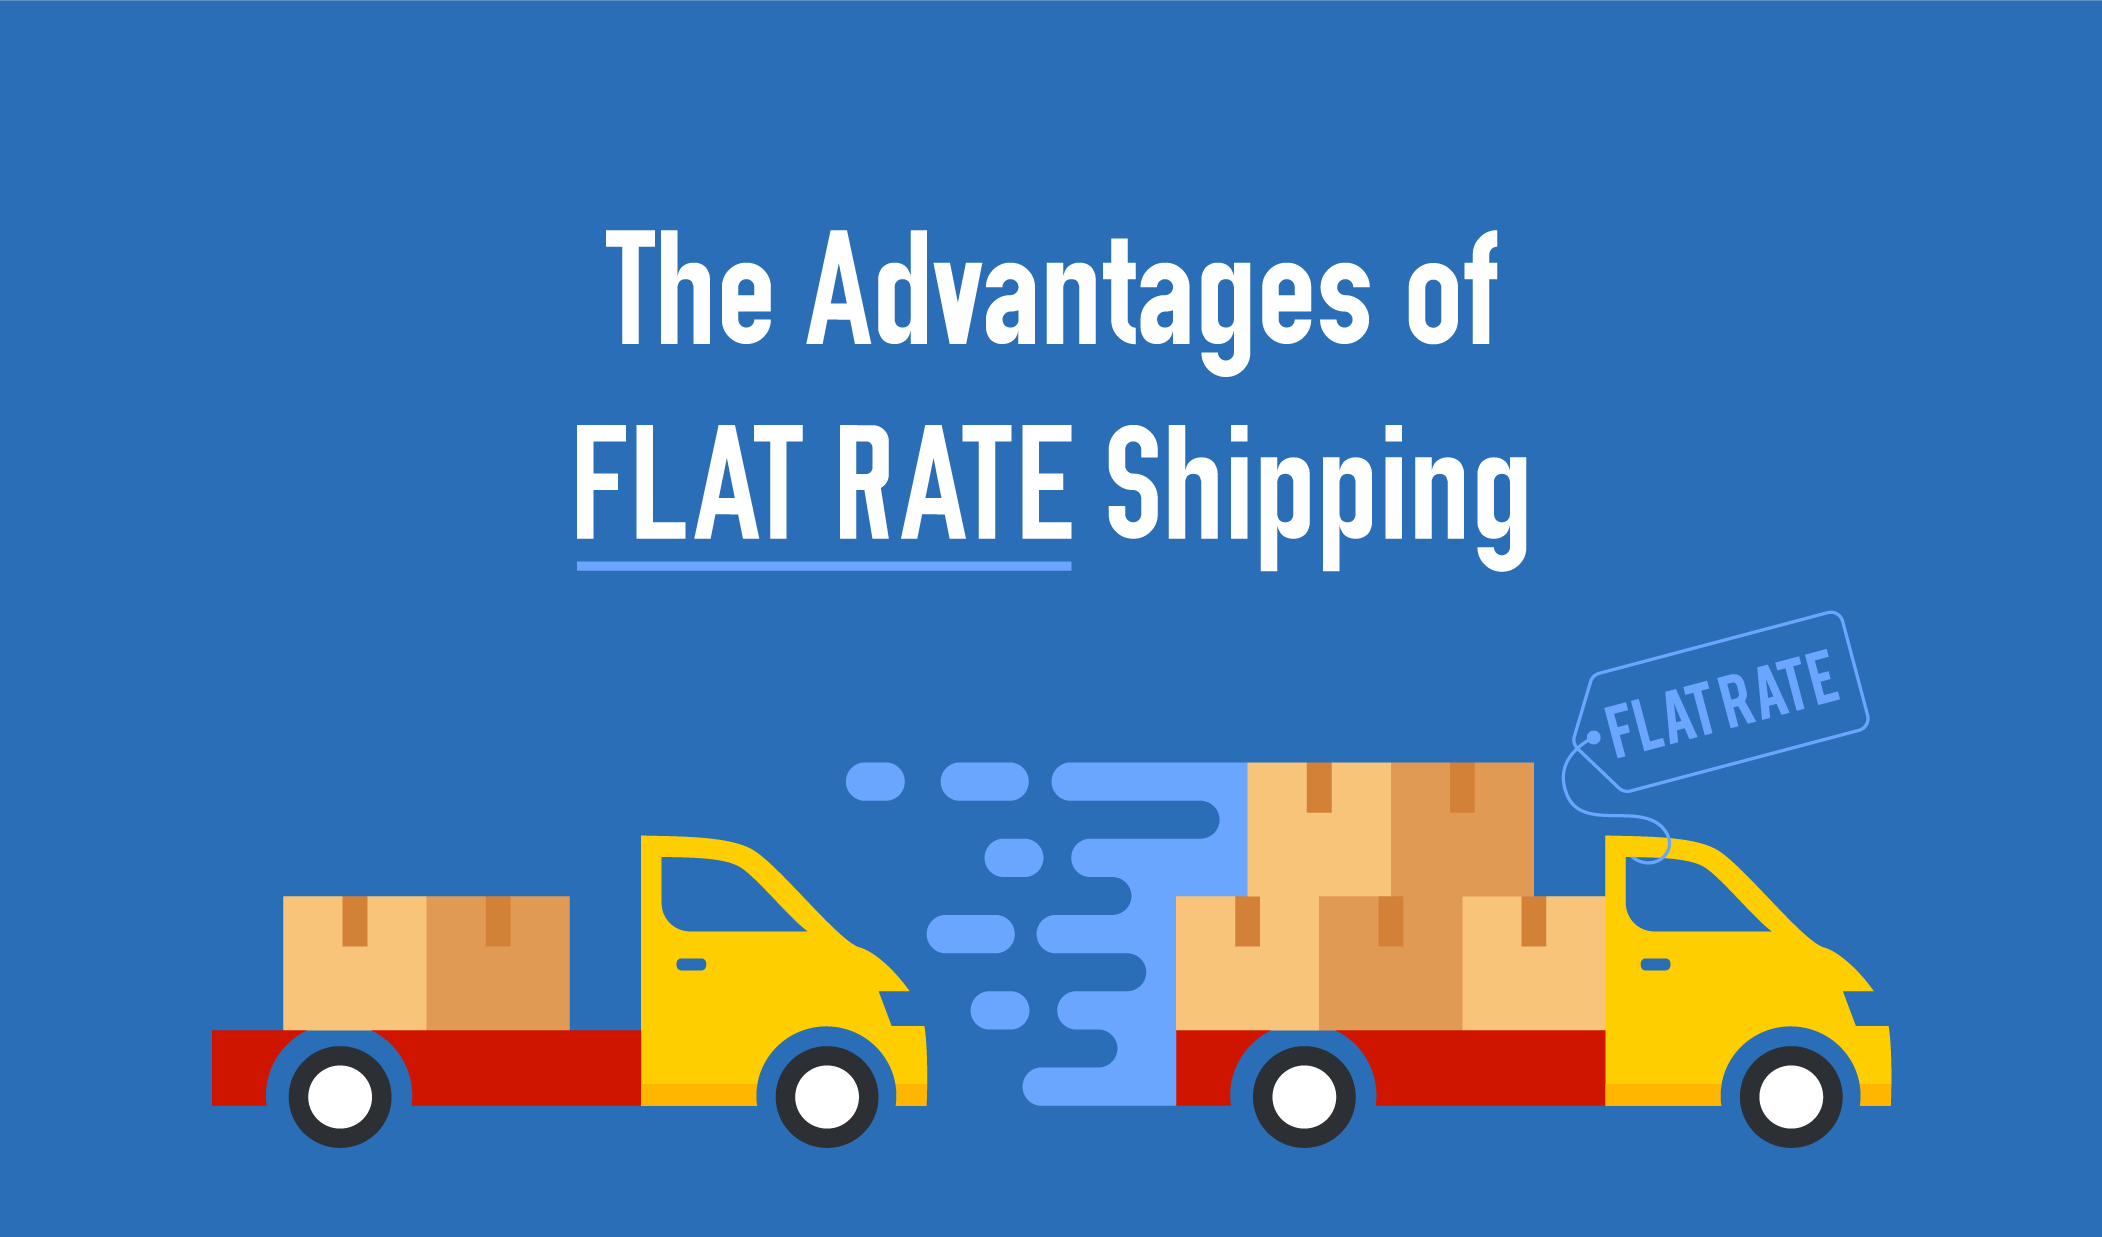 The Advantages of Flat Rate Shipping